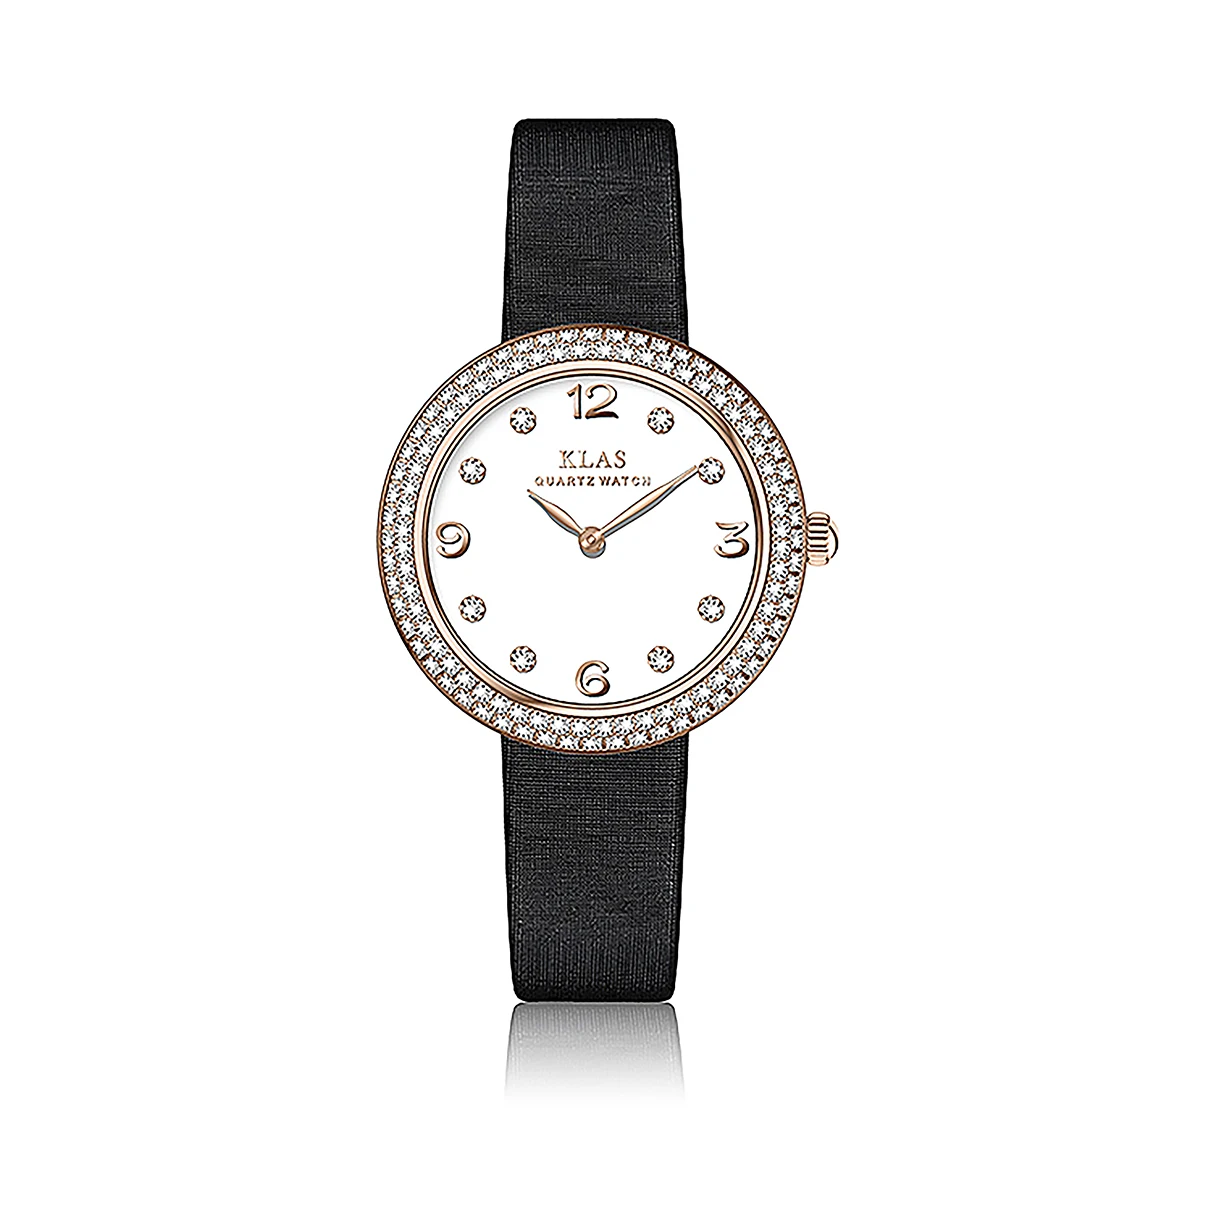 Light luxury and simple temperament, the trend of fashion ladies watchKLAS Brand